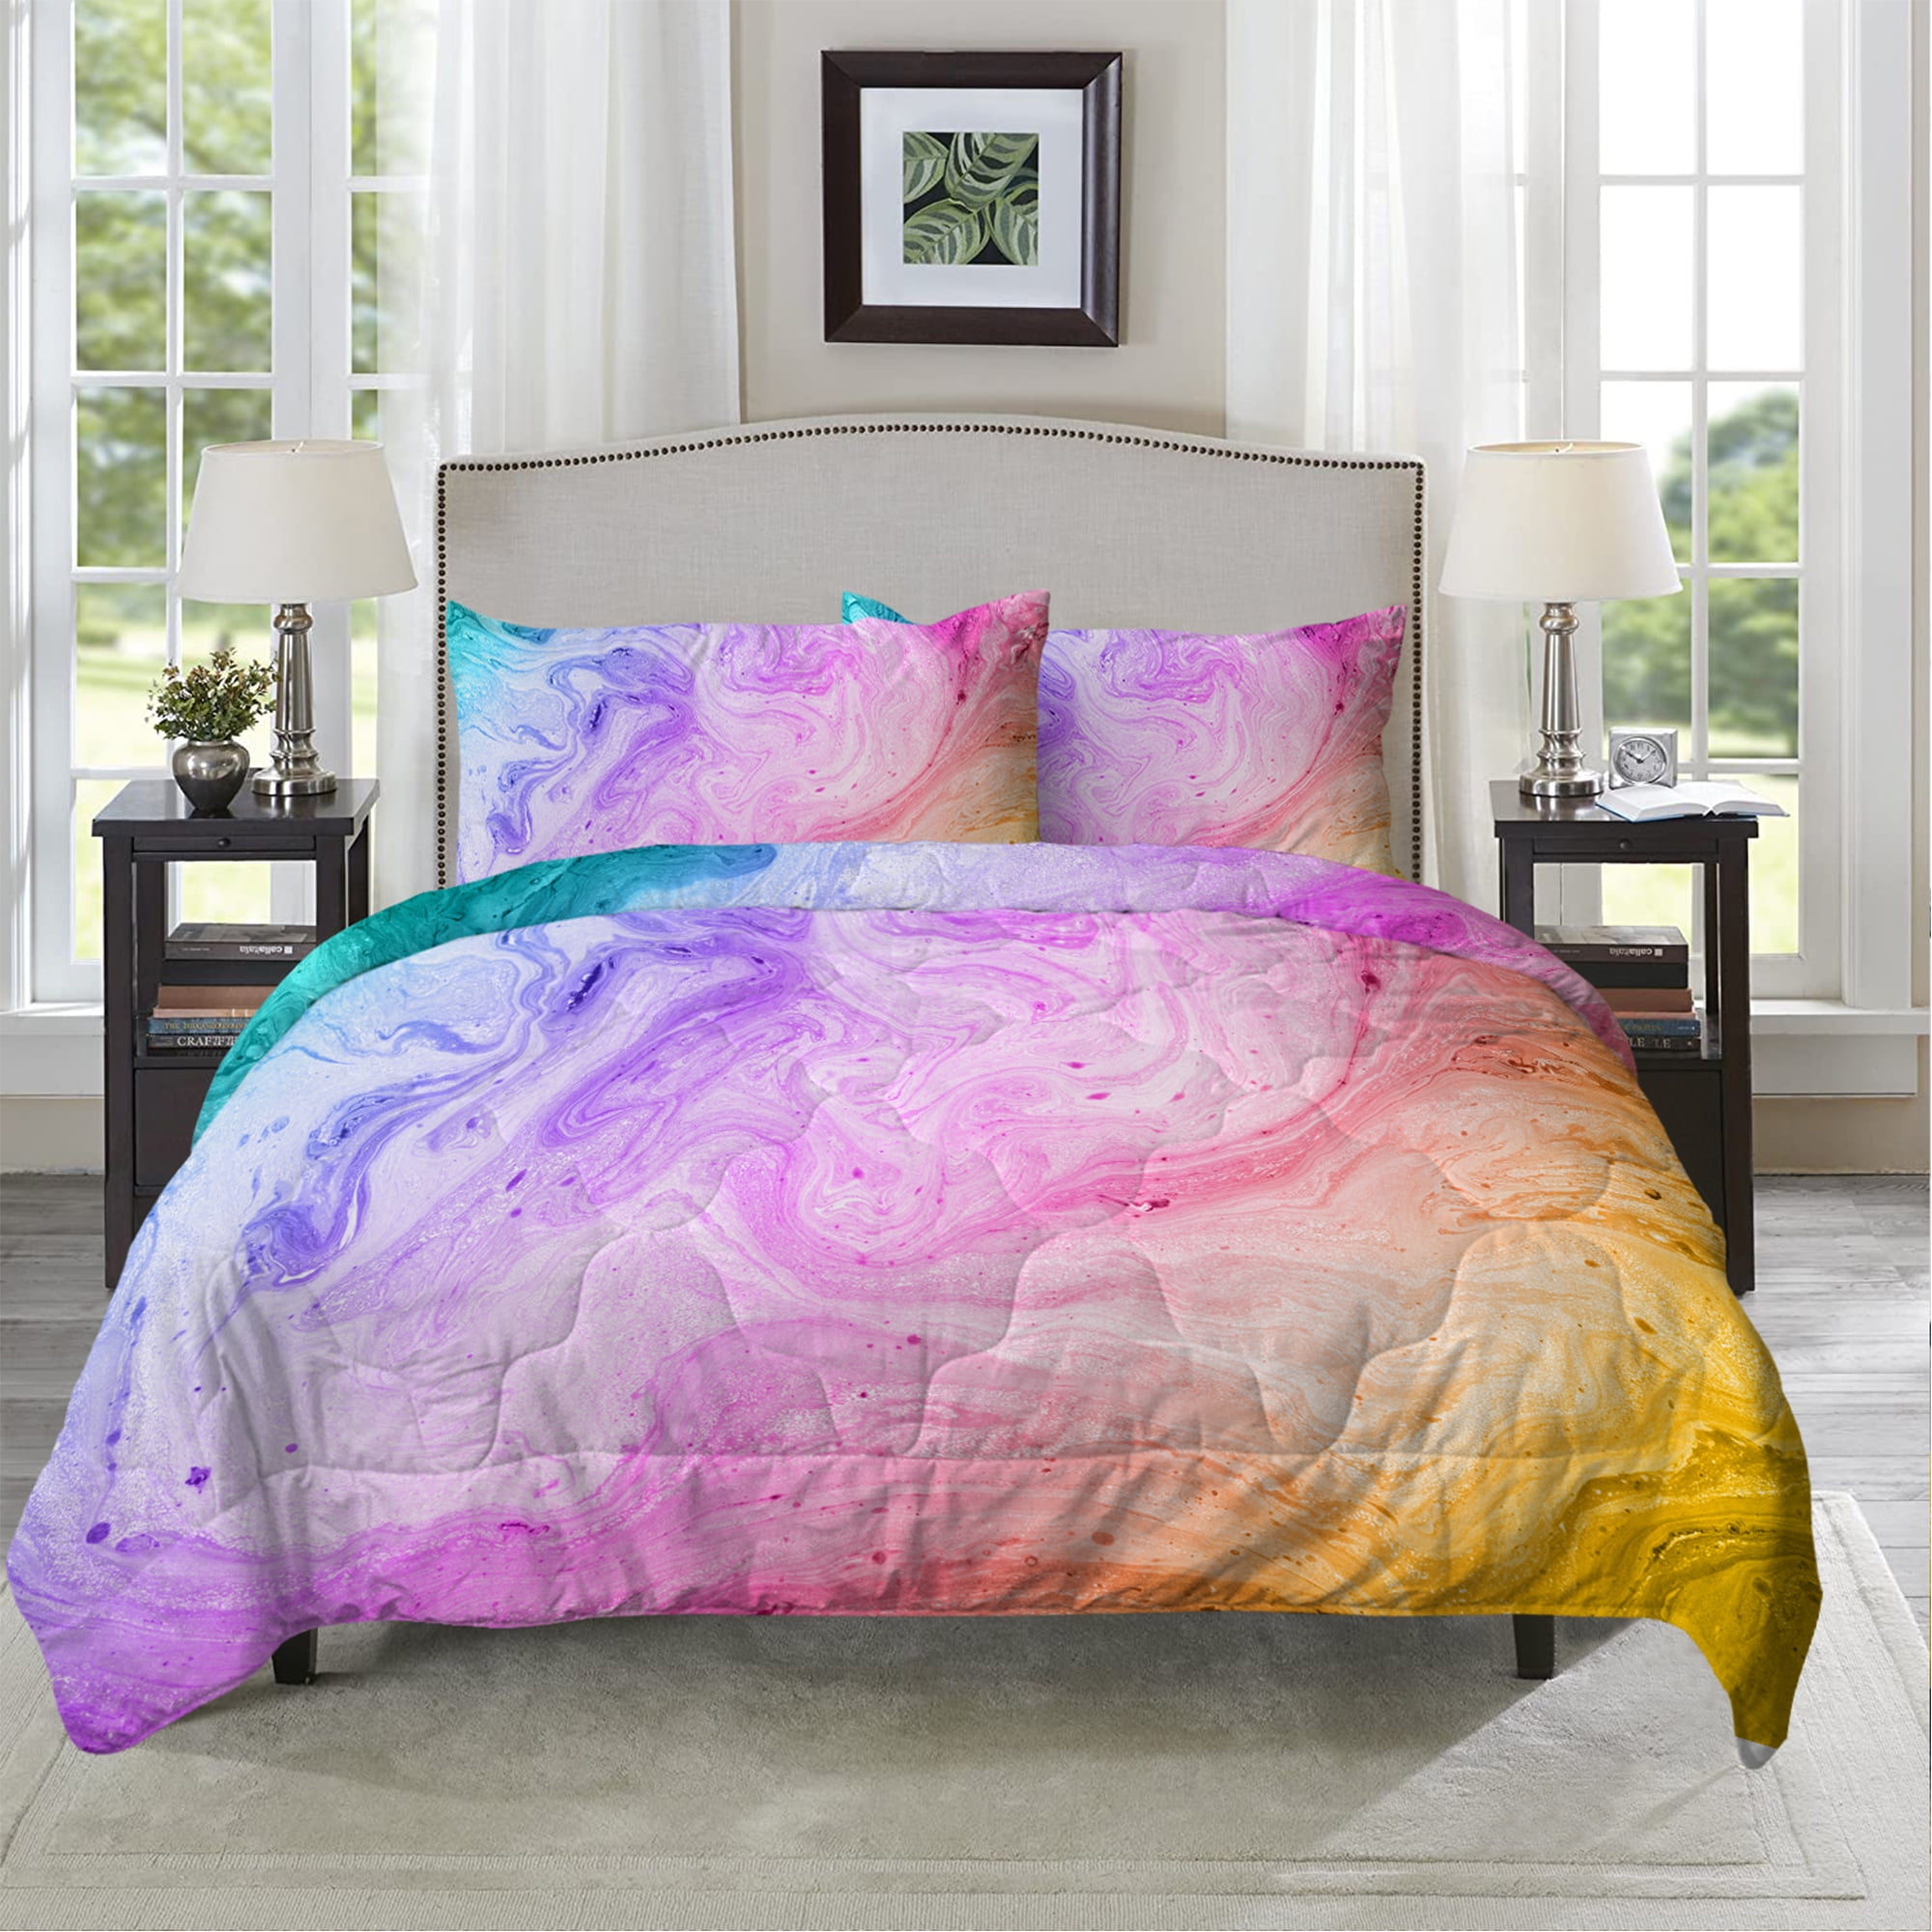 Tie Dye Bedding Quilt Sets, Queen Size Bed Sets For Teenage Girl